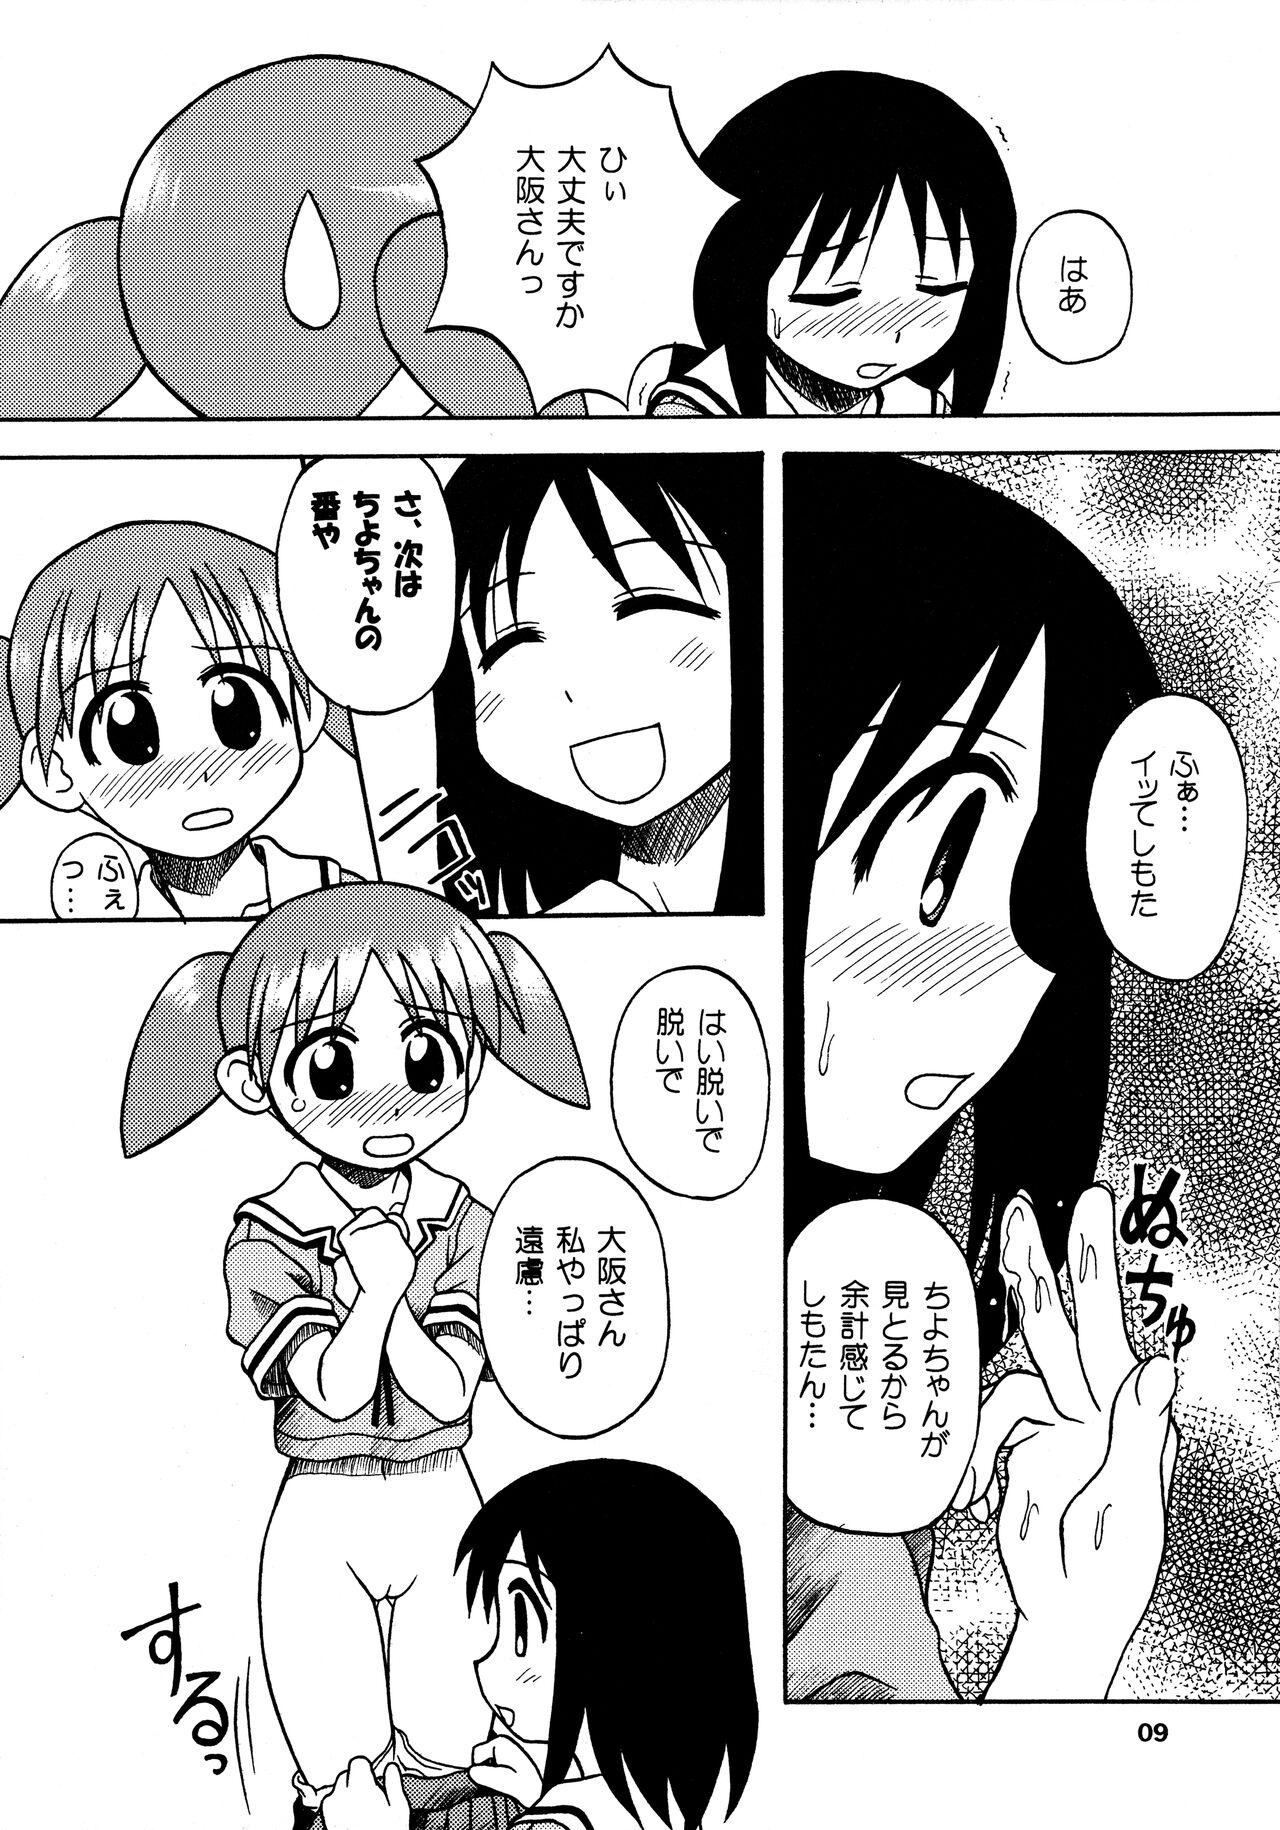 Naked ANOTHER LIFE - Azumanga daioh Perfect Body Porn - Page 9